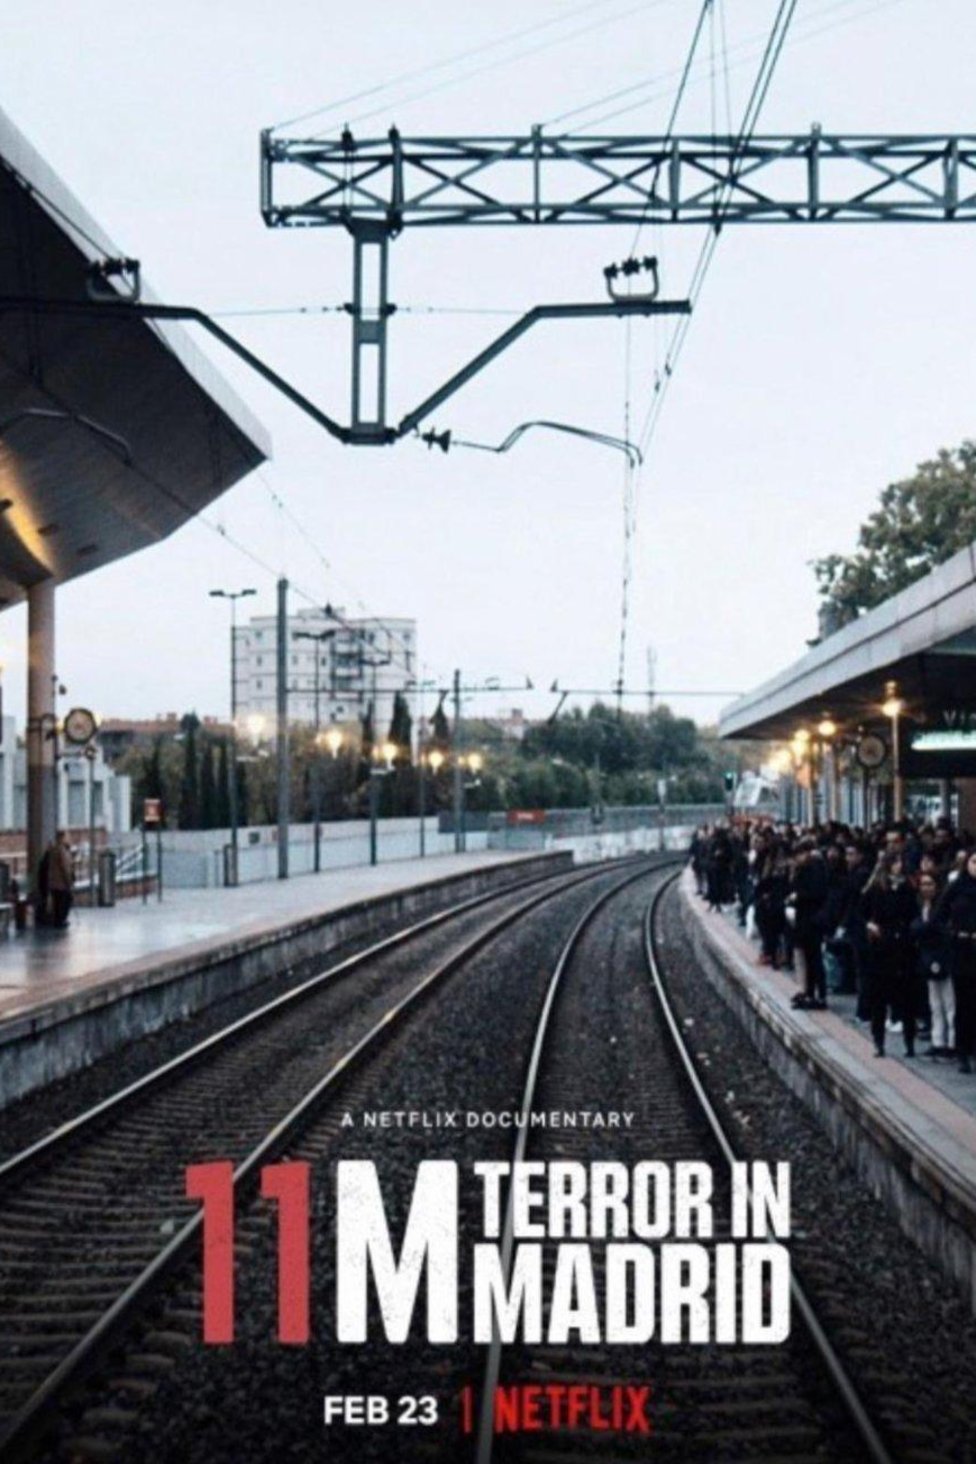 Spanish poster of the movie 11M: Terror in Madrid